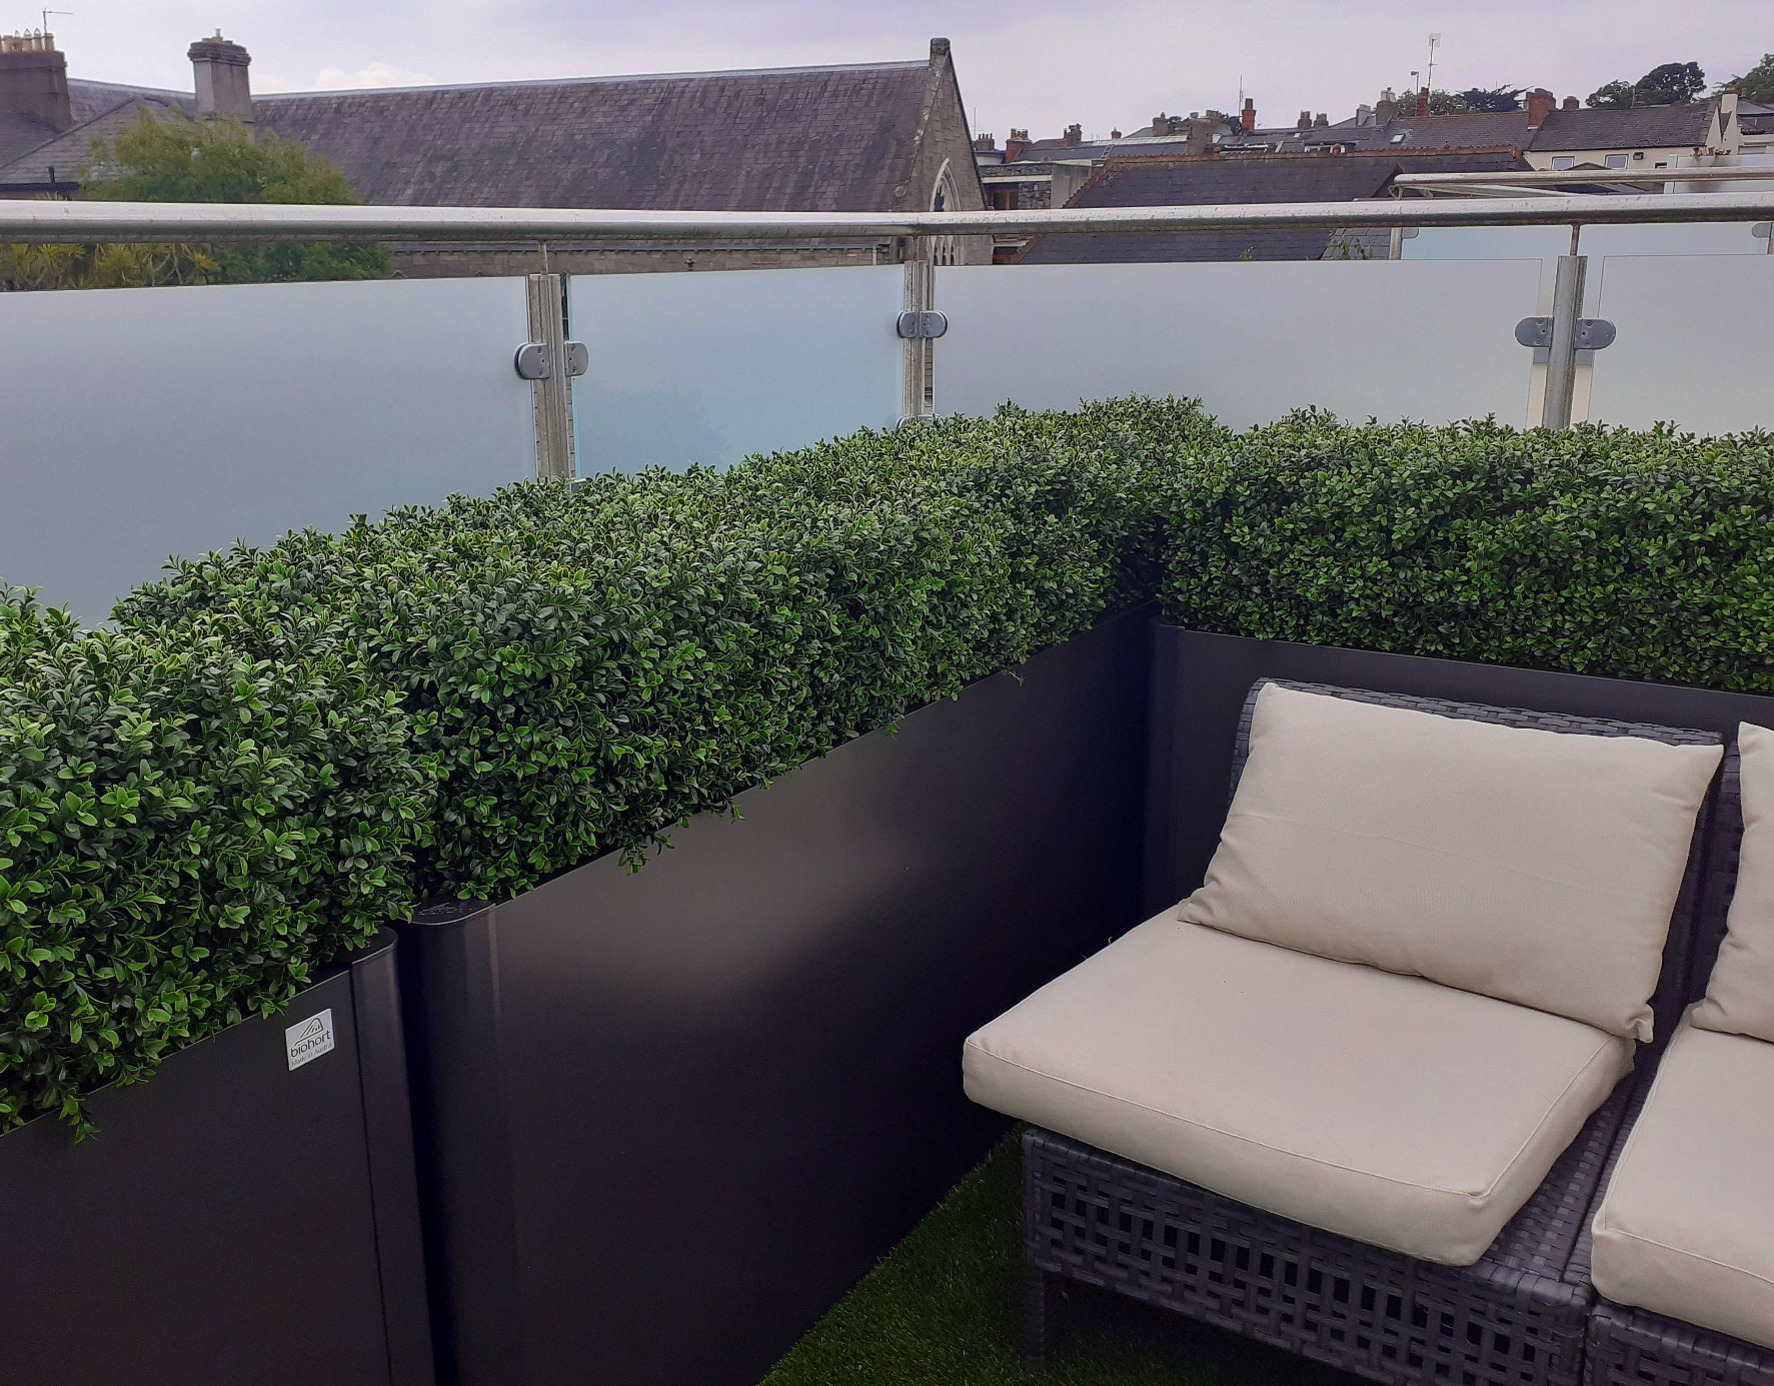 Add structure & style to the roof terrace and balcony areas | Biohort Planting Bed Belvedere Size M in metallic dark grey | Supplied + Fitted in Dun Laoghaire, Co Dublin | Owen Chubb